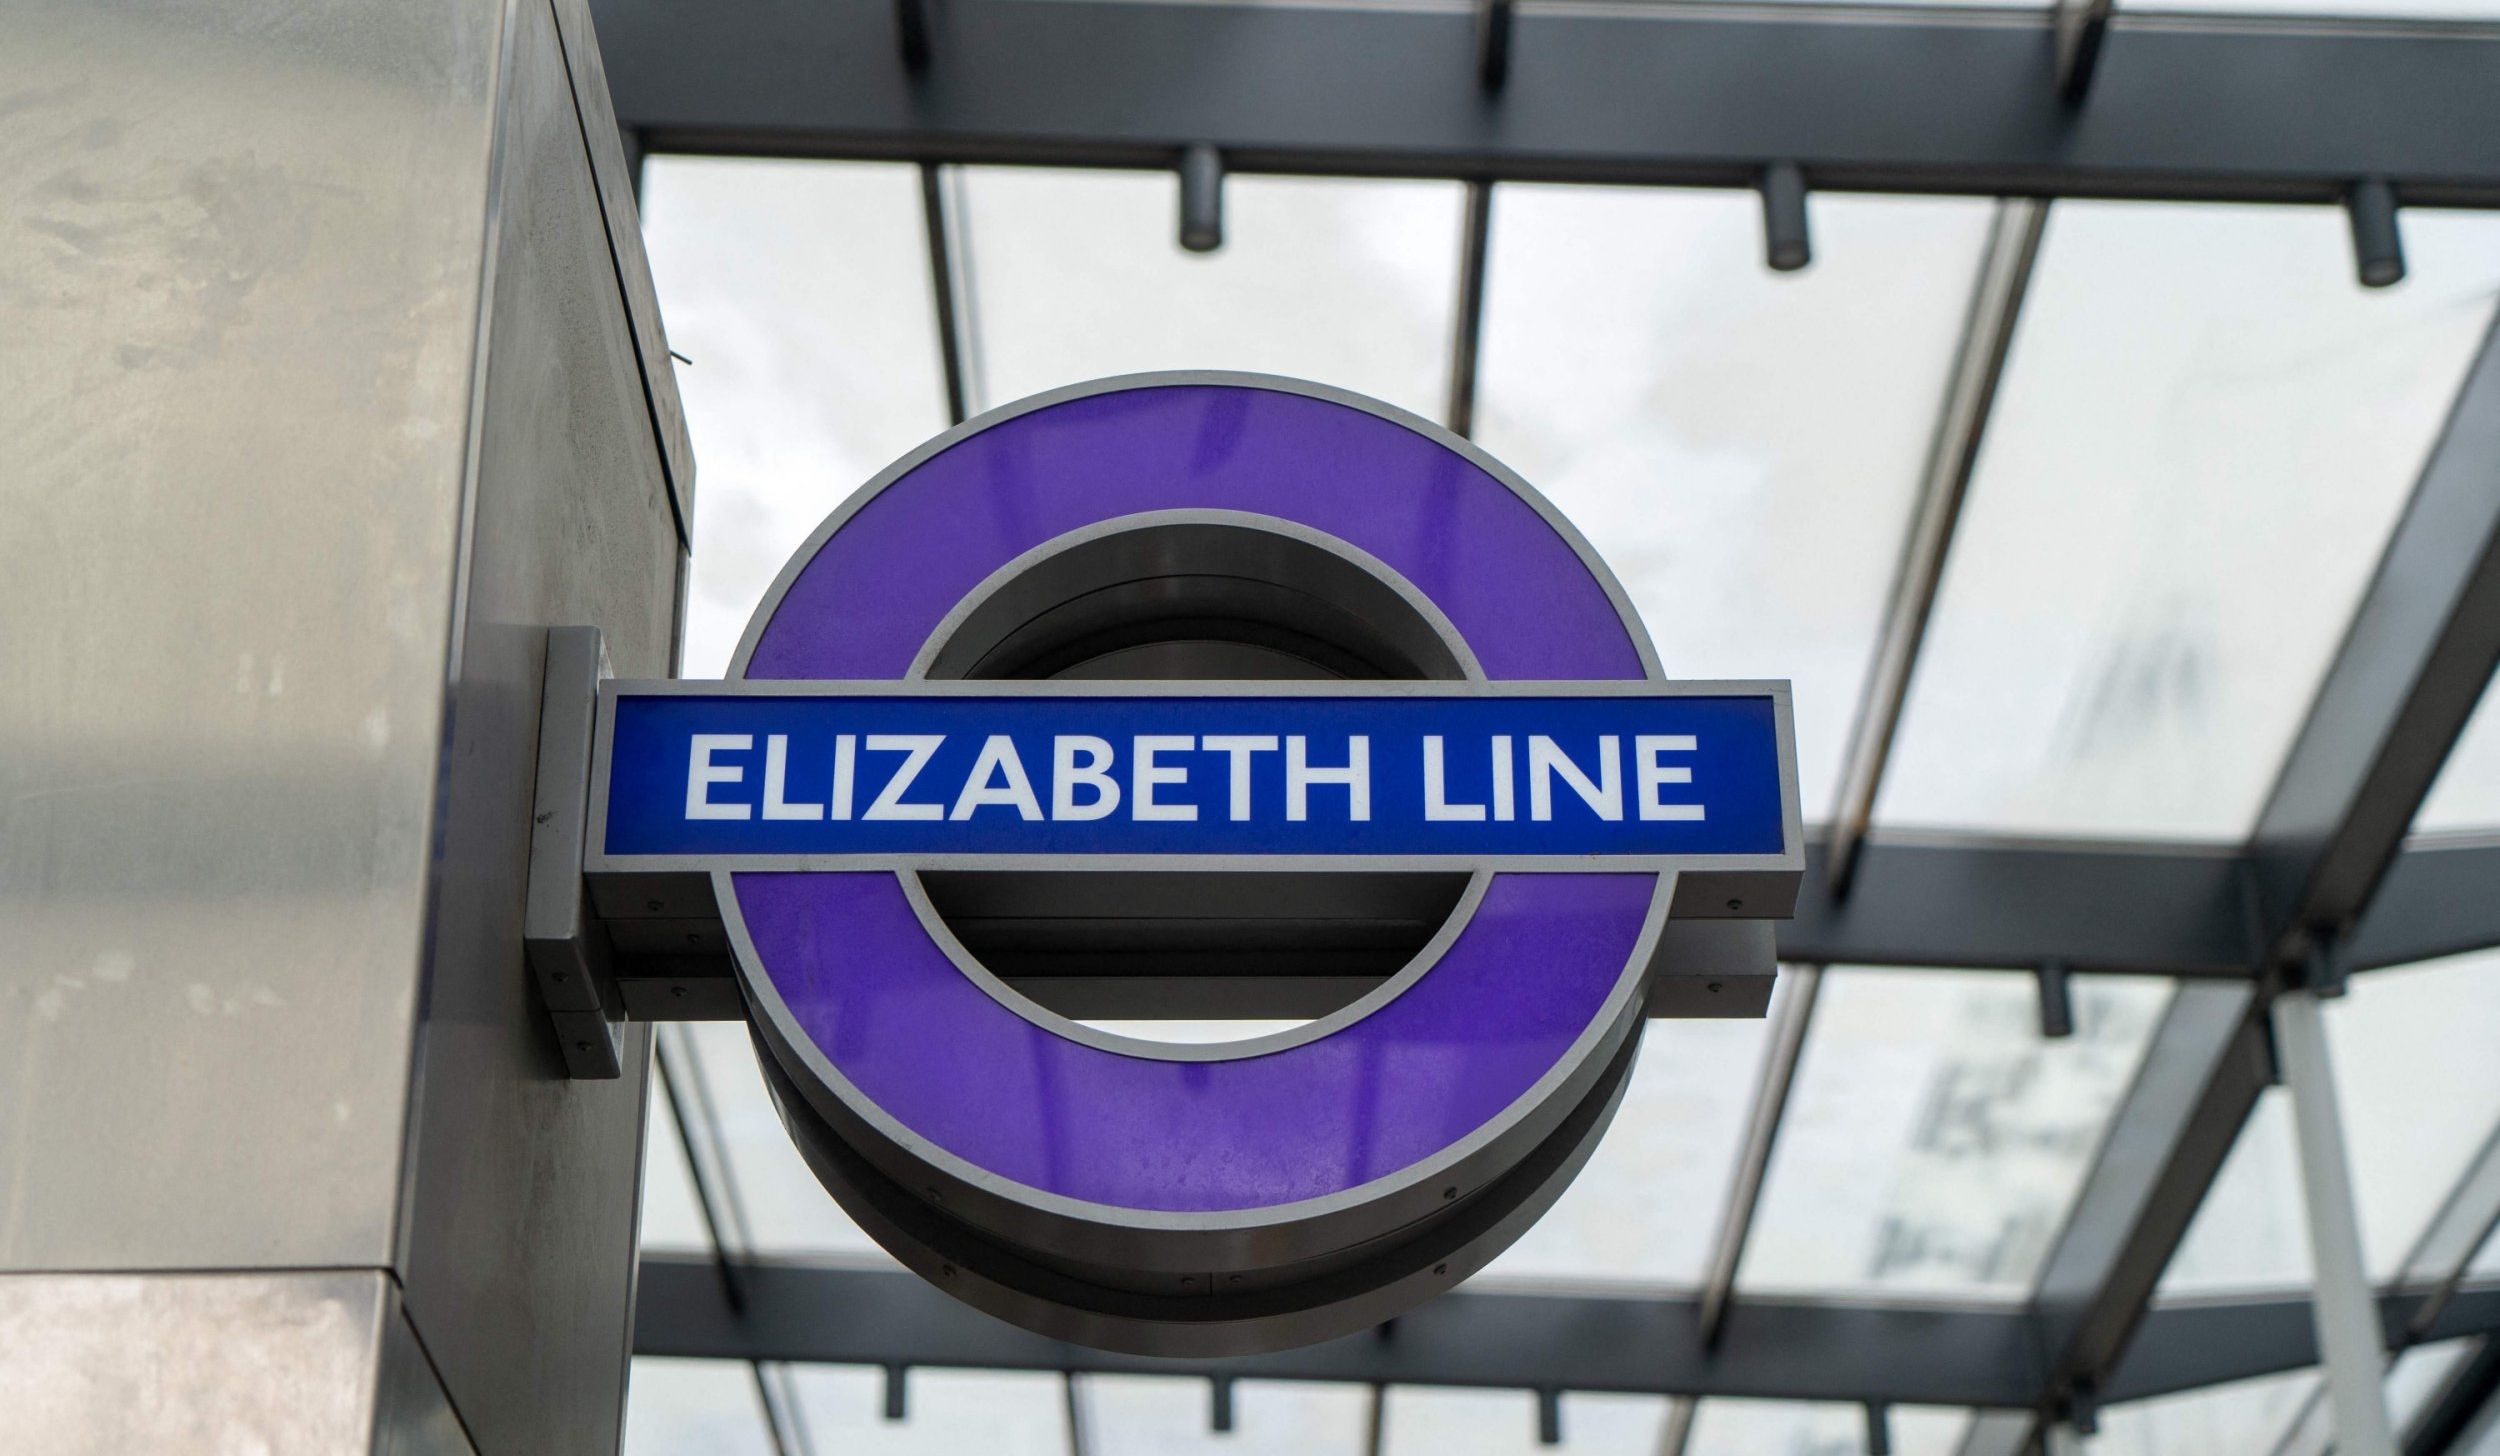 The Elizabeth line opens just in time for CDW